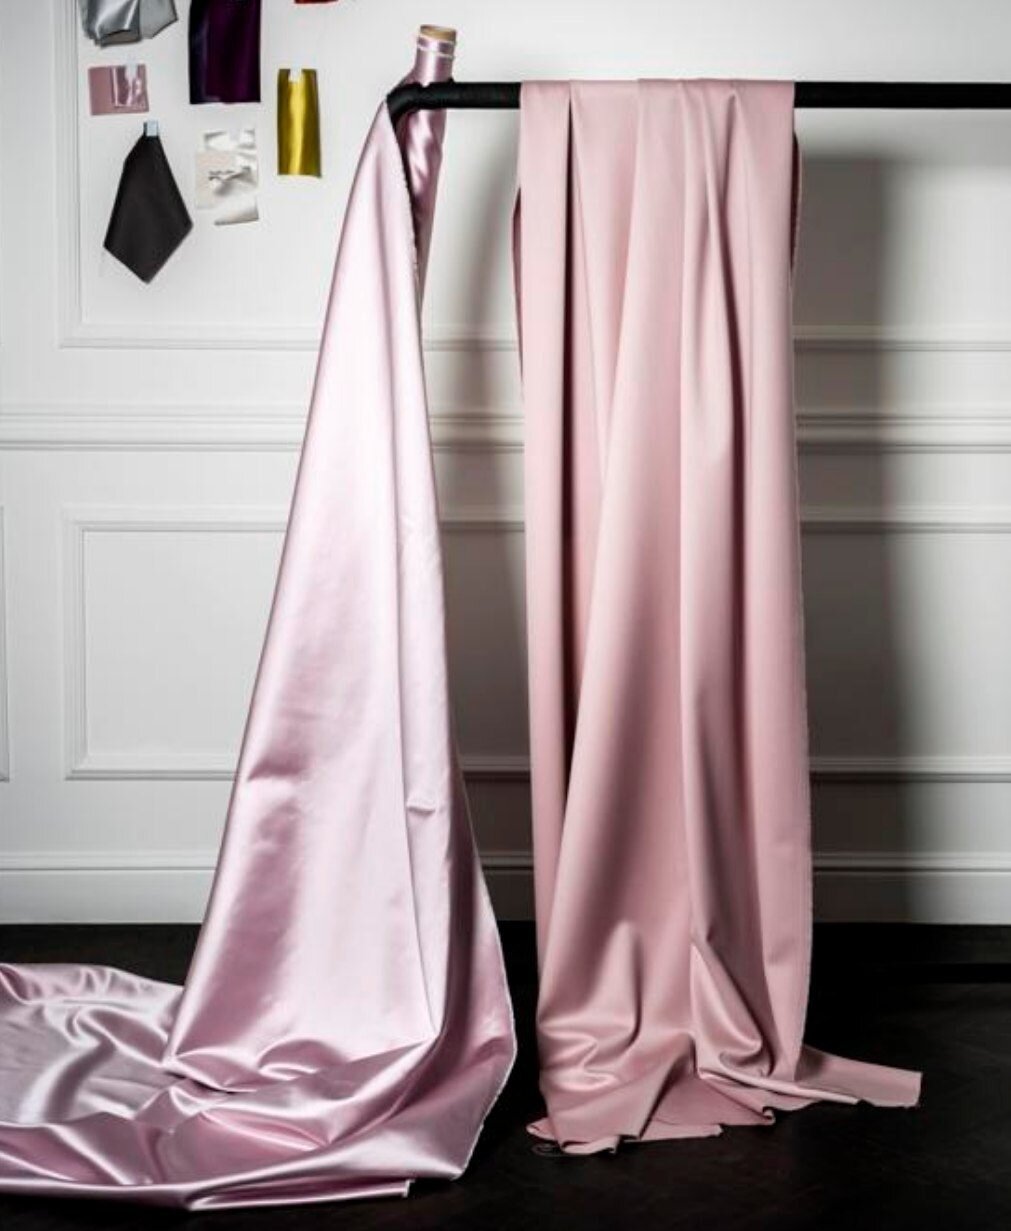 While living in @Barbie house may not be your dream anymore, you can still enjoy a touch of fuchsia delight in your very own home. This extremely smooth and densely woven satin silk by Dedar in iconic pink shade will bring fun and elegance to your gr